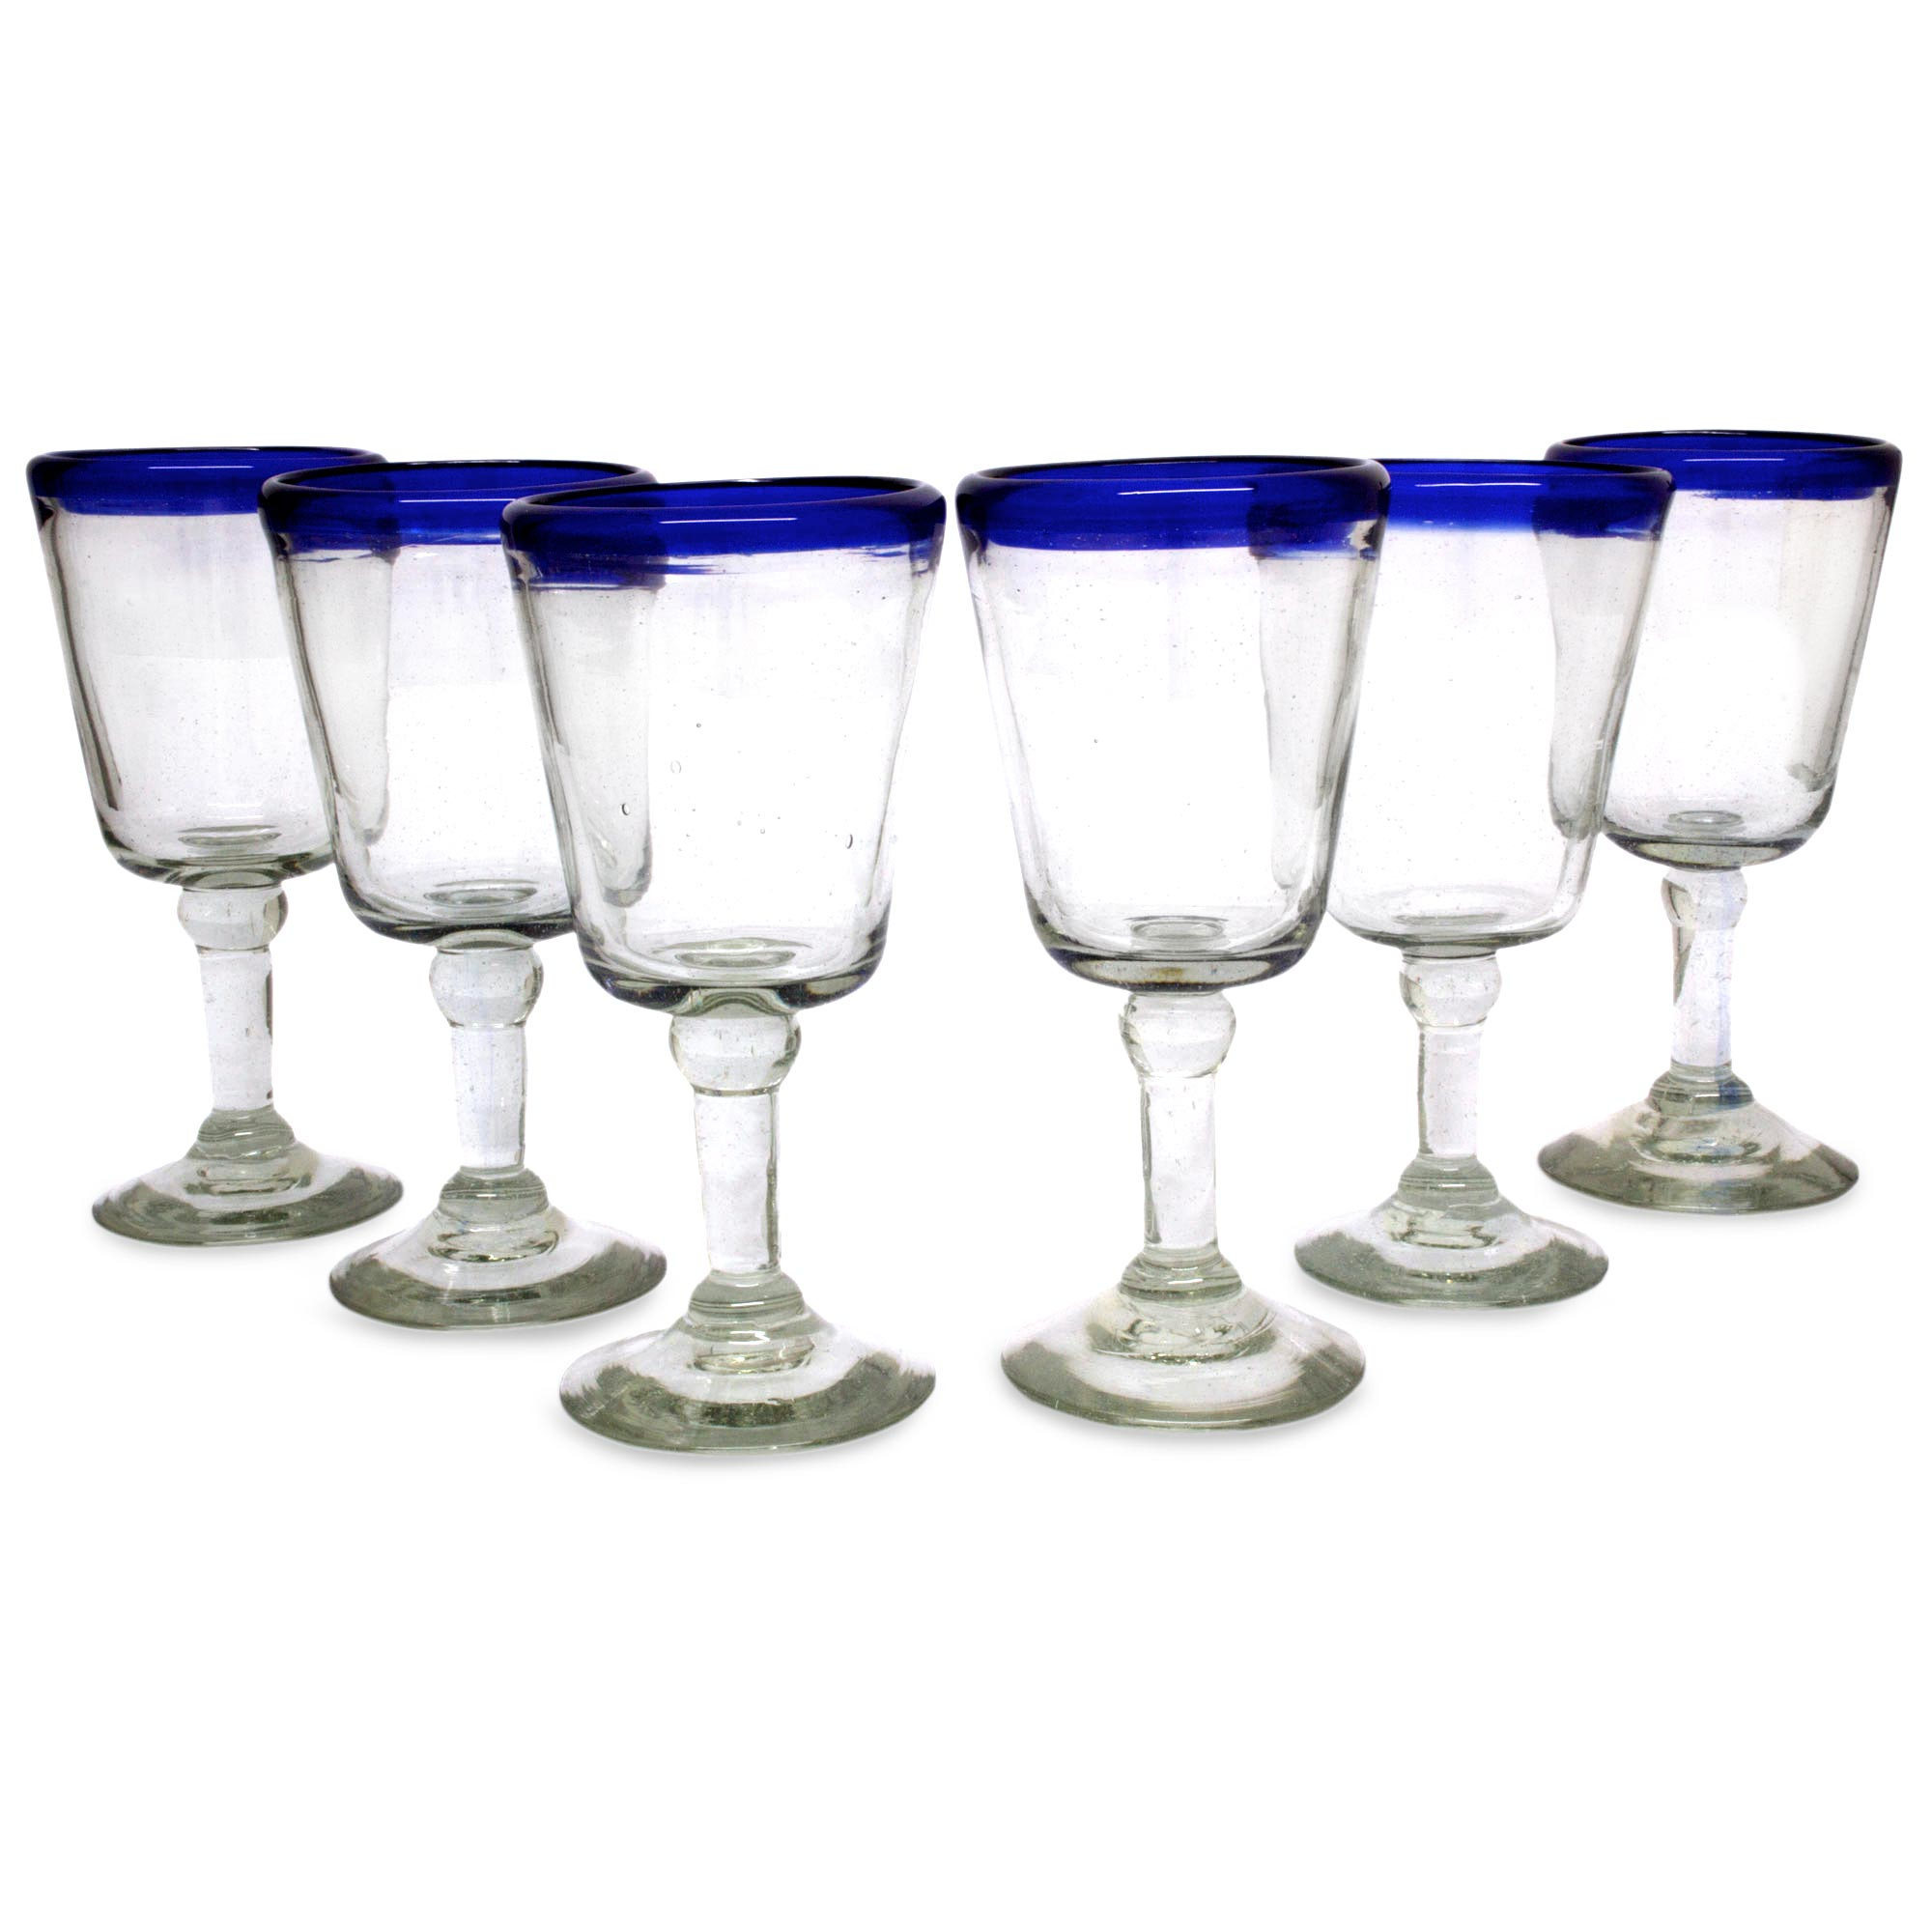 Featured image of post Blue Wine Glasses From Friends / Cover them in a solid color or decorate them to match the cup design.